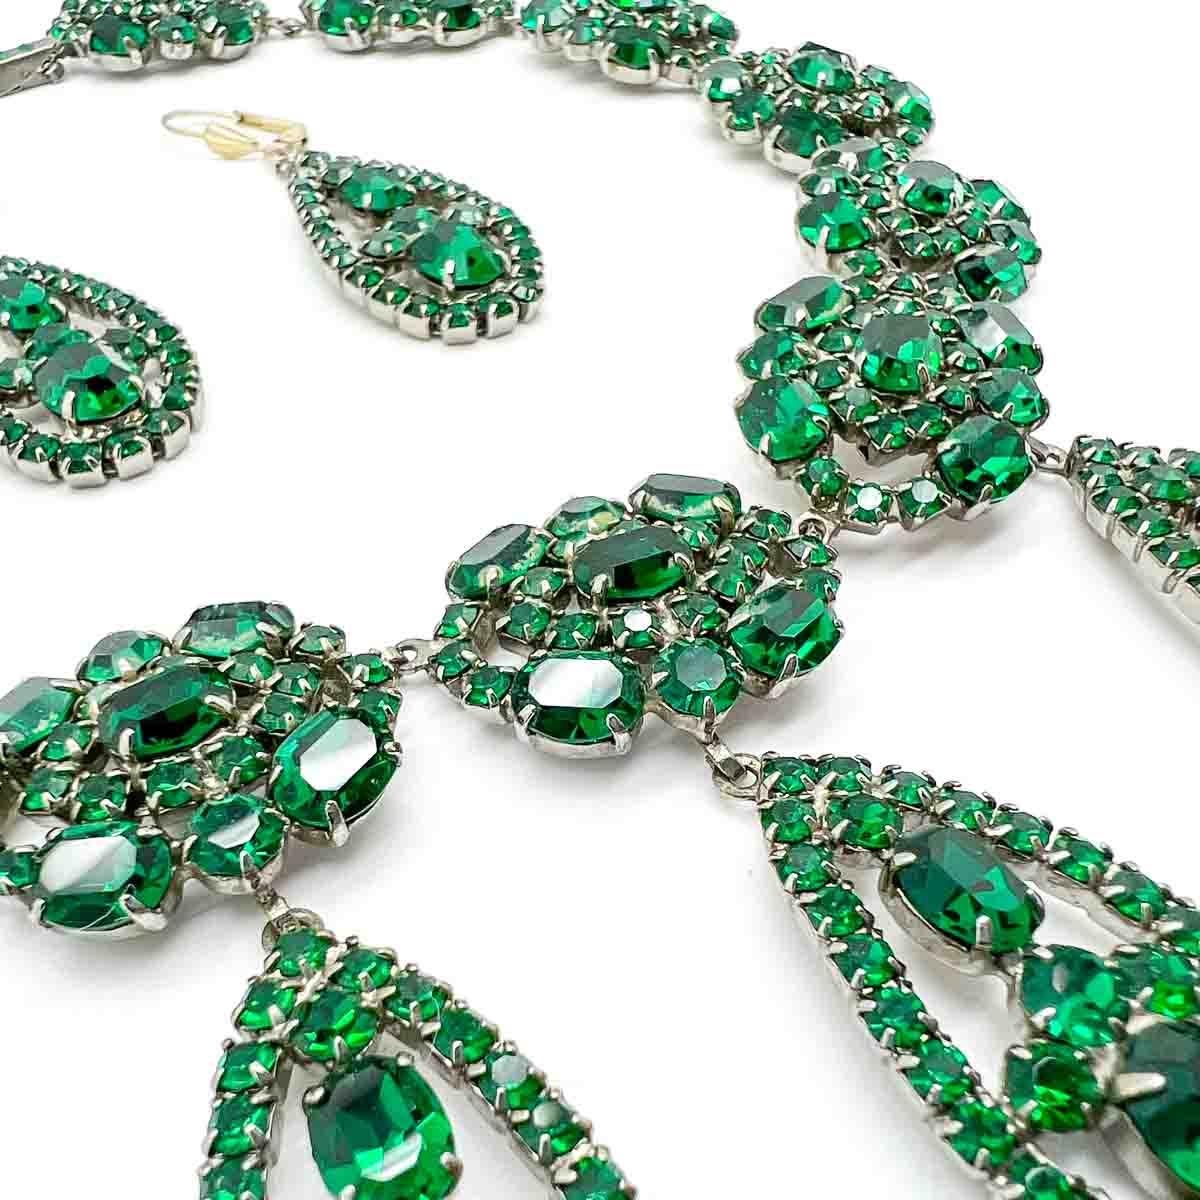 A divine Vintage Emerald Crystal Demi Parure. Inspired by Georgian jewellery designs this beautifully crafted demi-parure comprises a riviere style collar with droplets accompanied by a statement pair of matching, long teardrop earrings. The